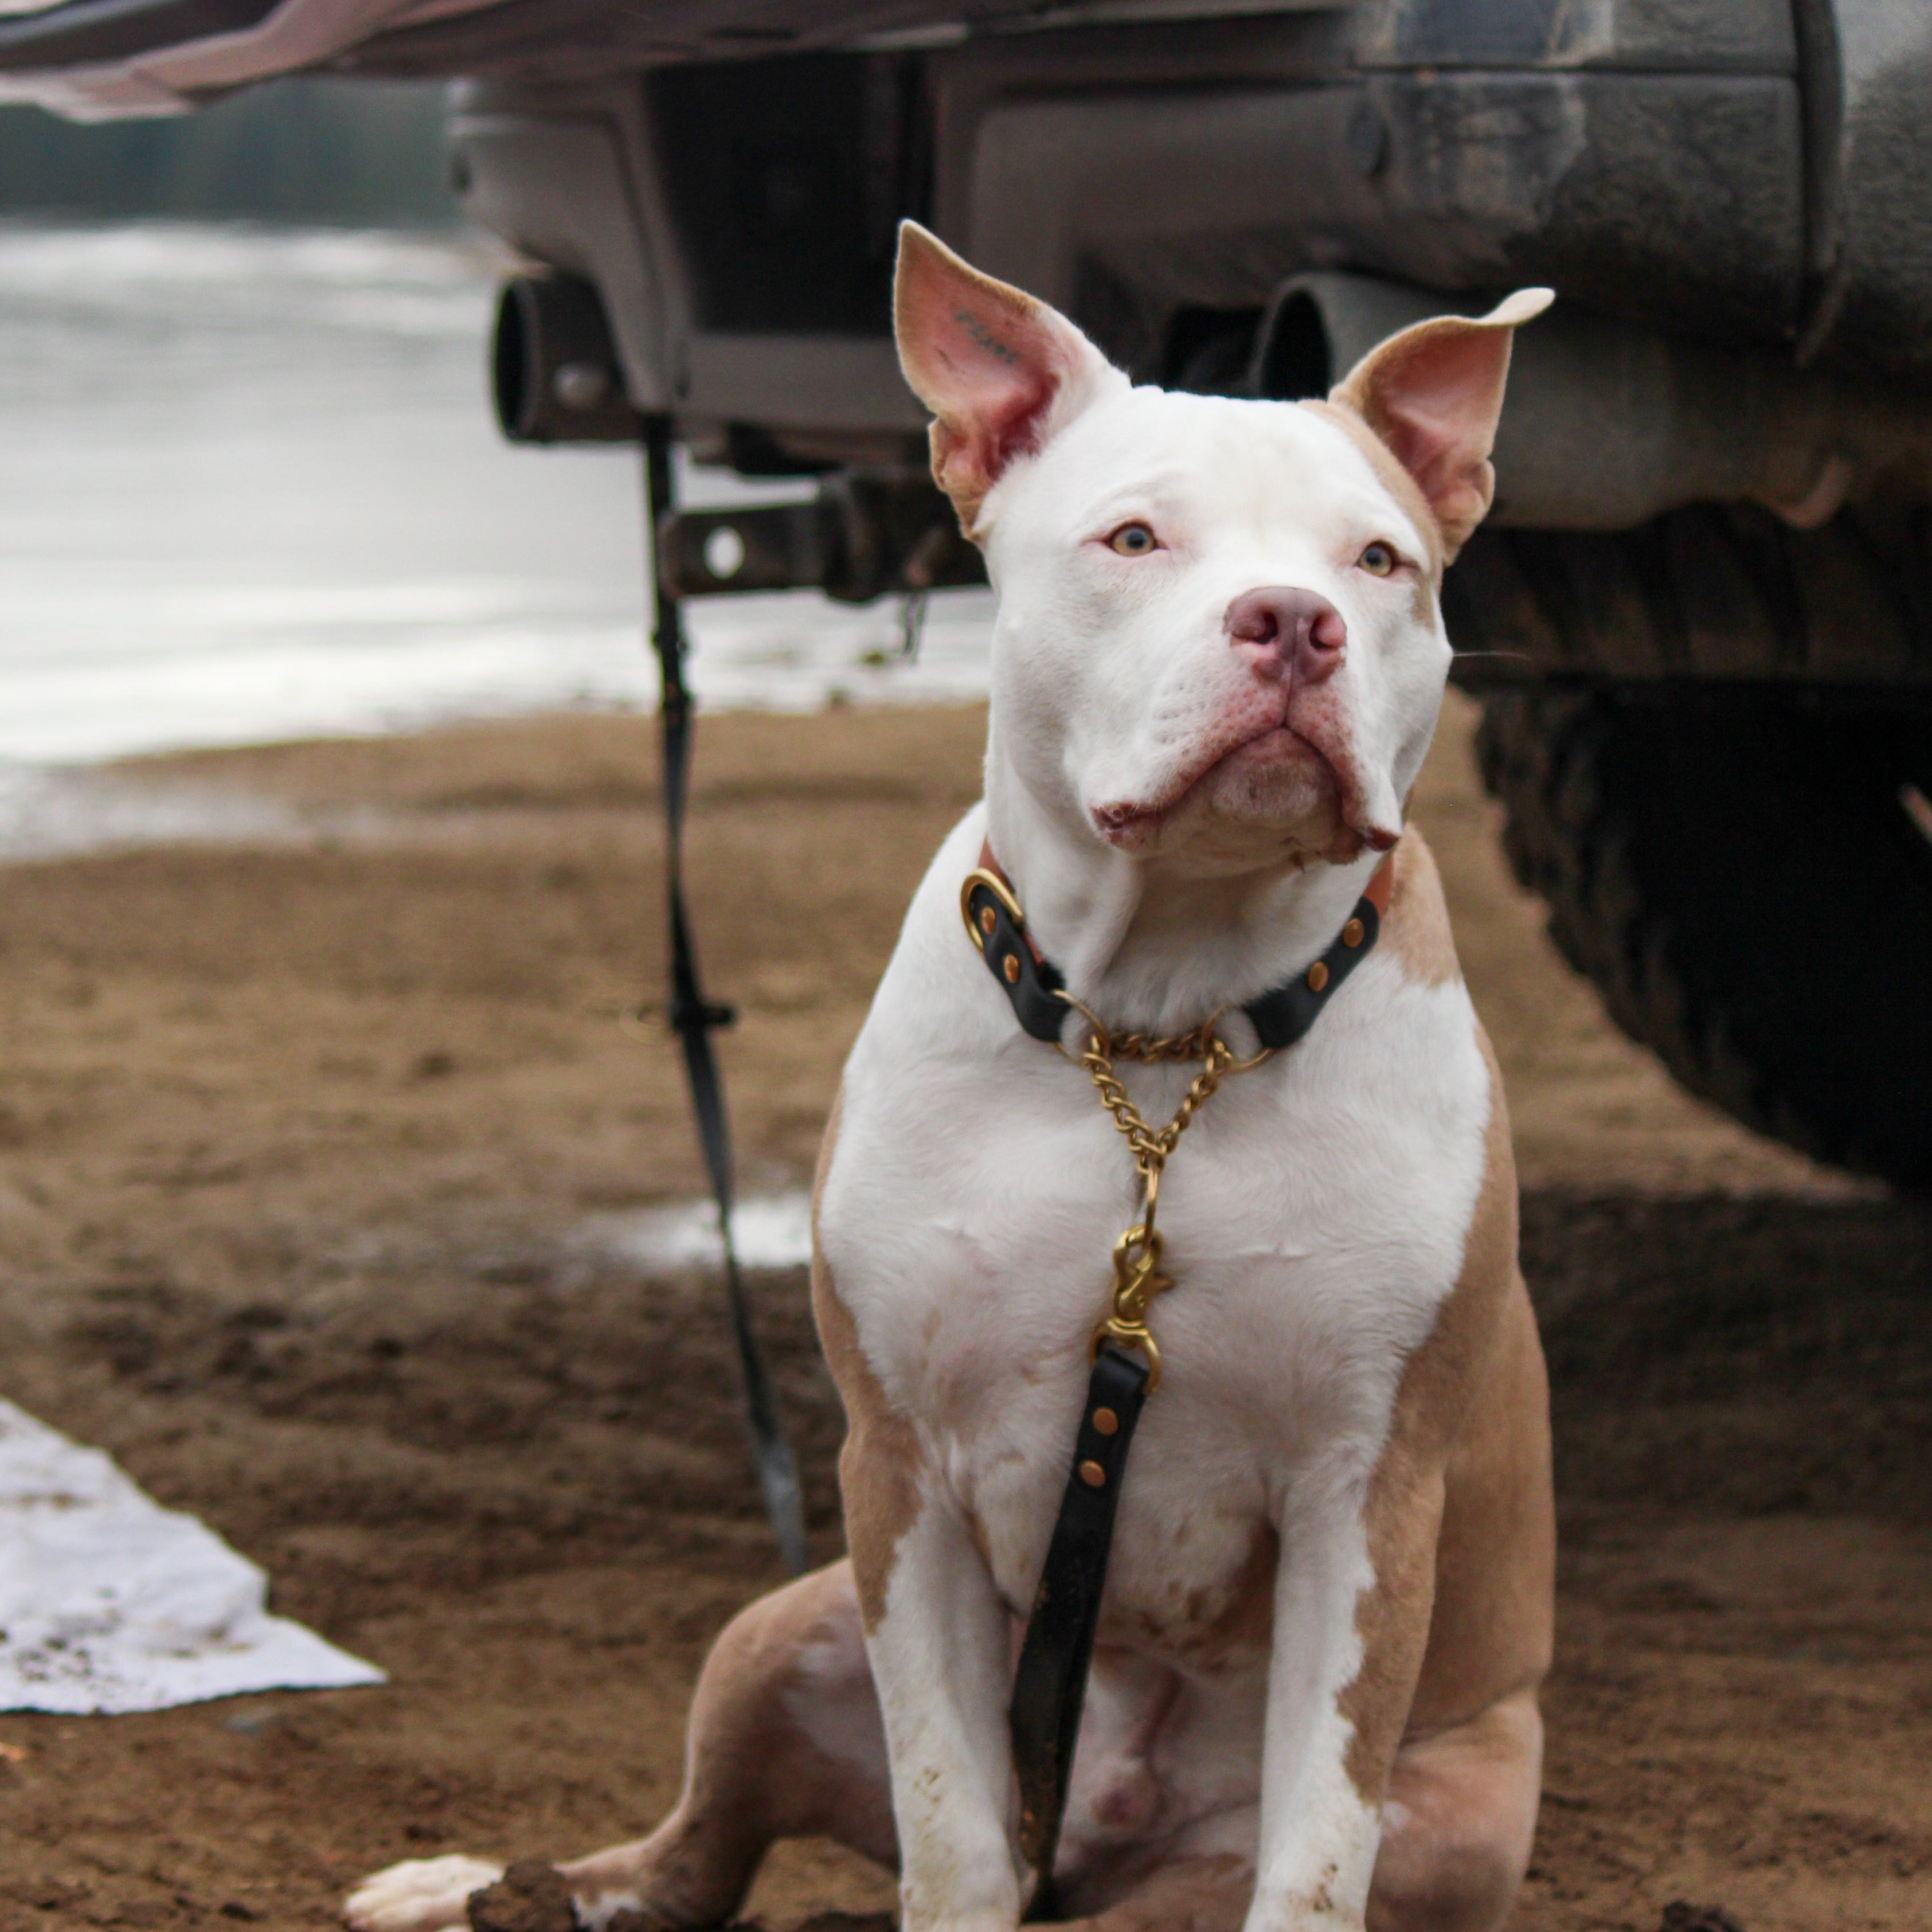 Dog anchored to a truck in the mud with a Waterproof Biothane Hands-Free Dog Leash